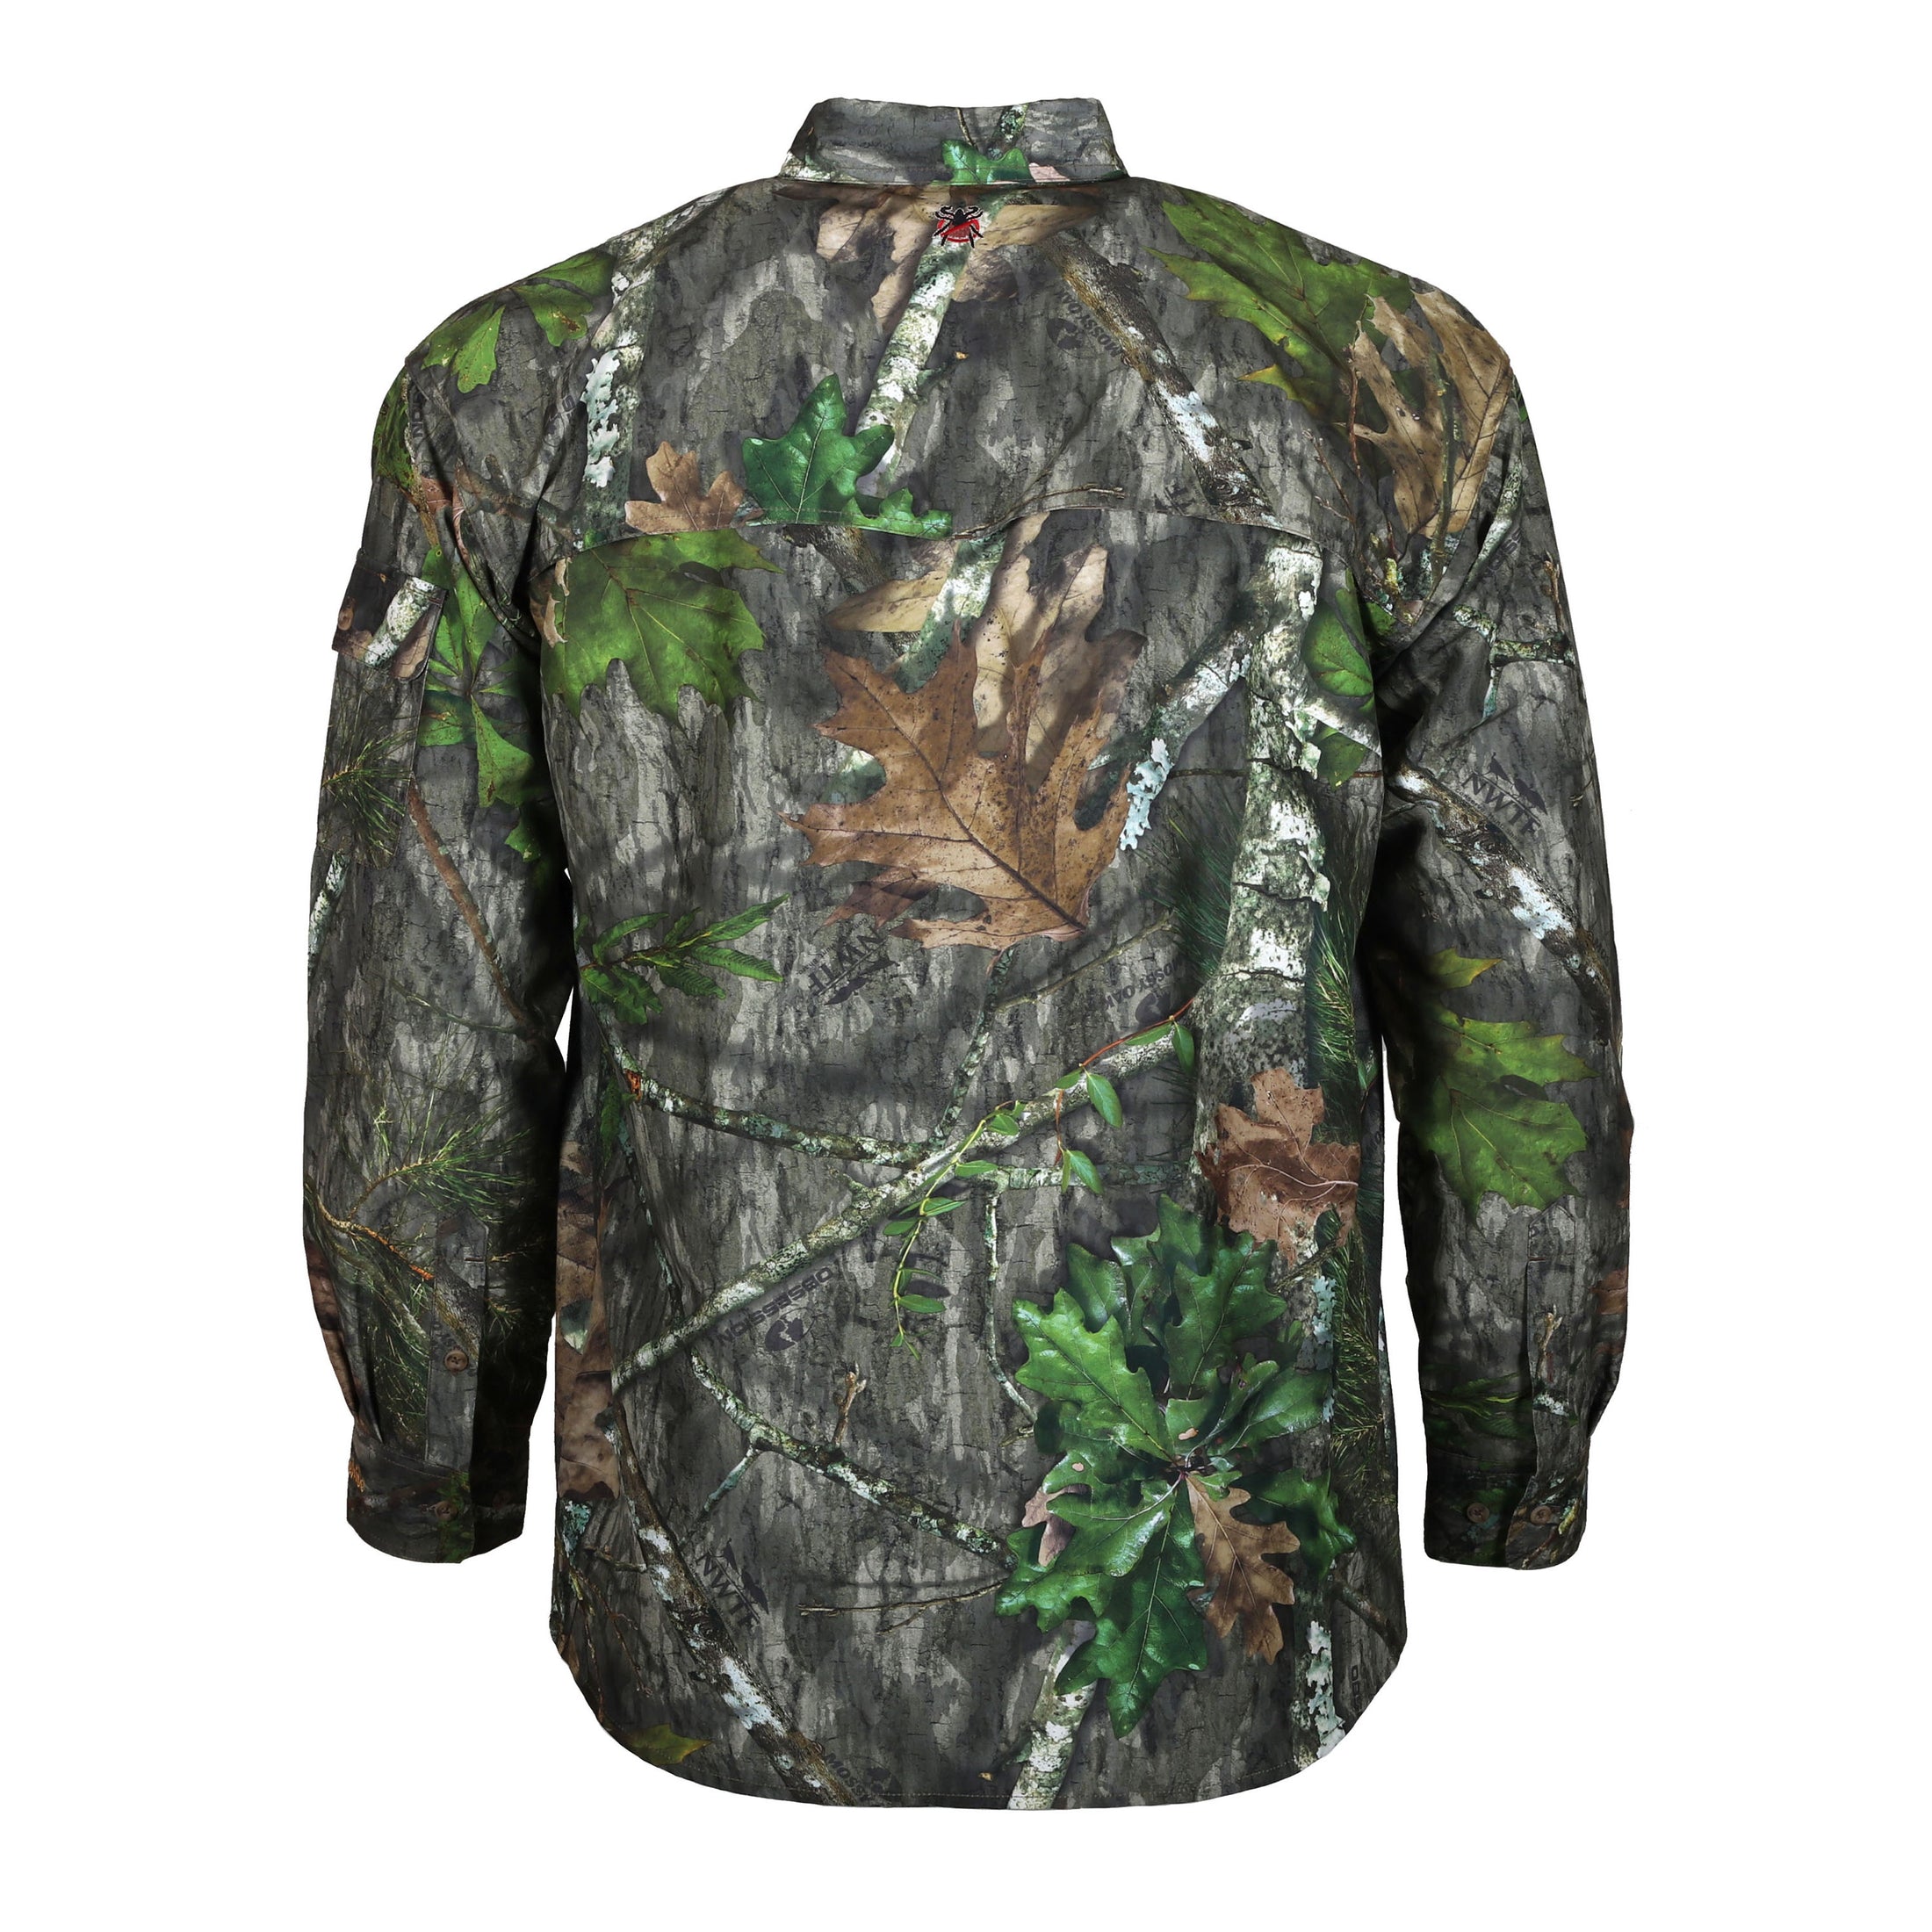 gamehide Elimitick Insect Repellent Ultra Lite Shirt back (mossy oak obsession)